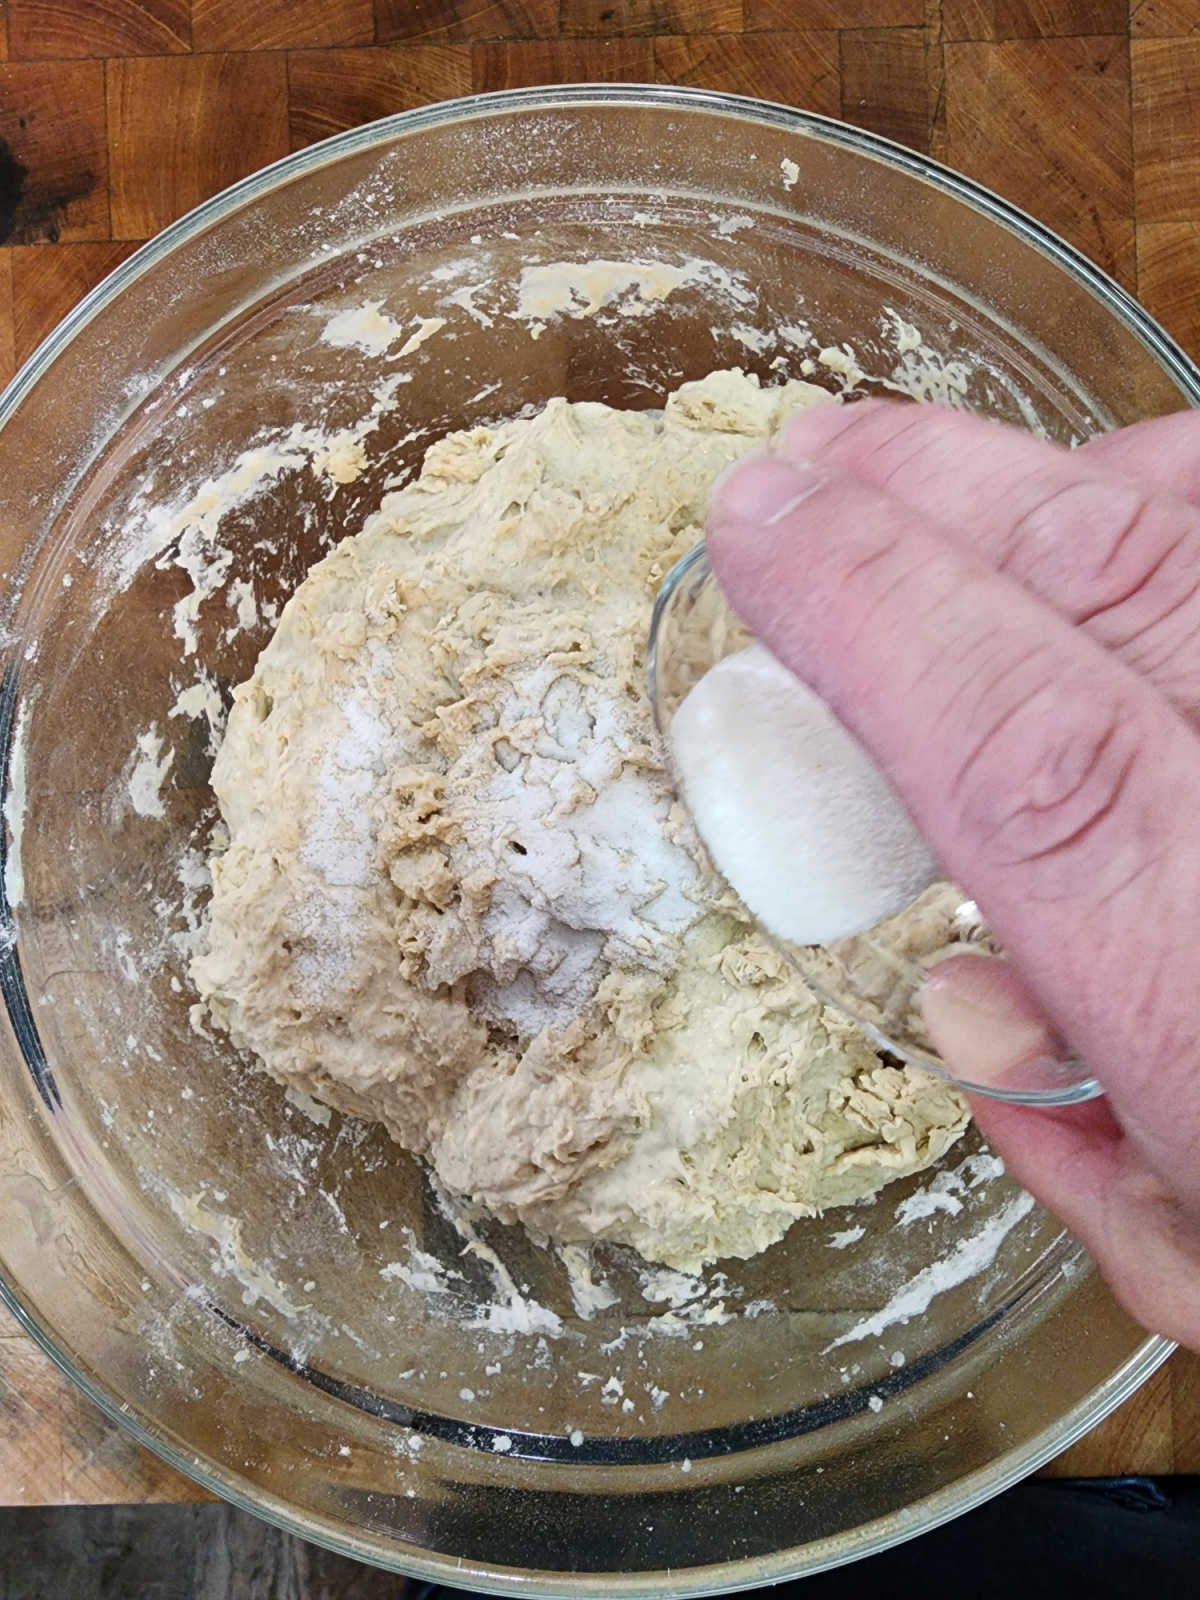 Hand pouring salt over sourdough dough in clear glass bowl on butcher block.